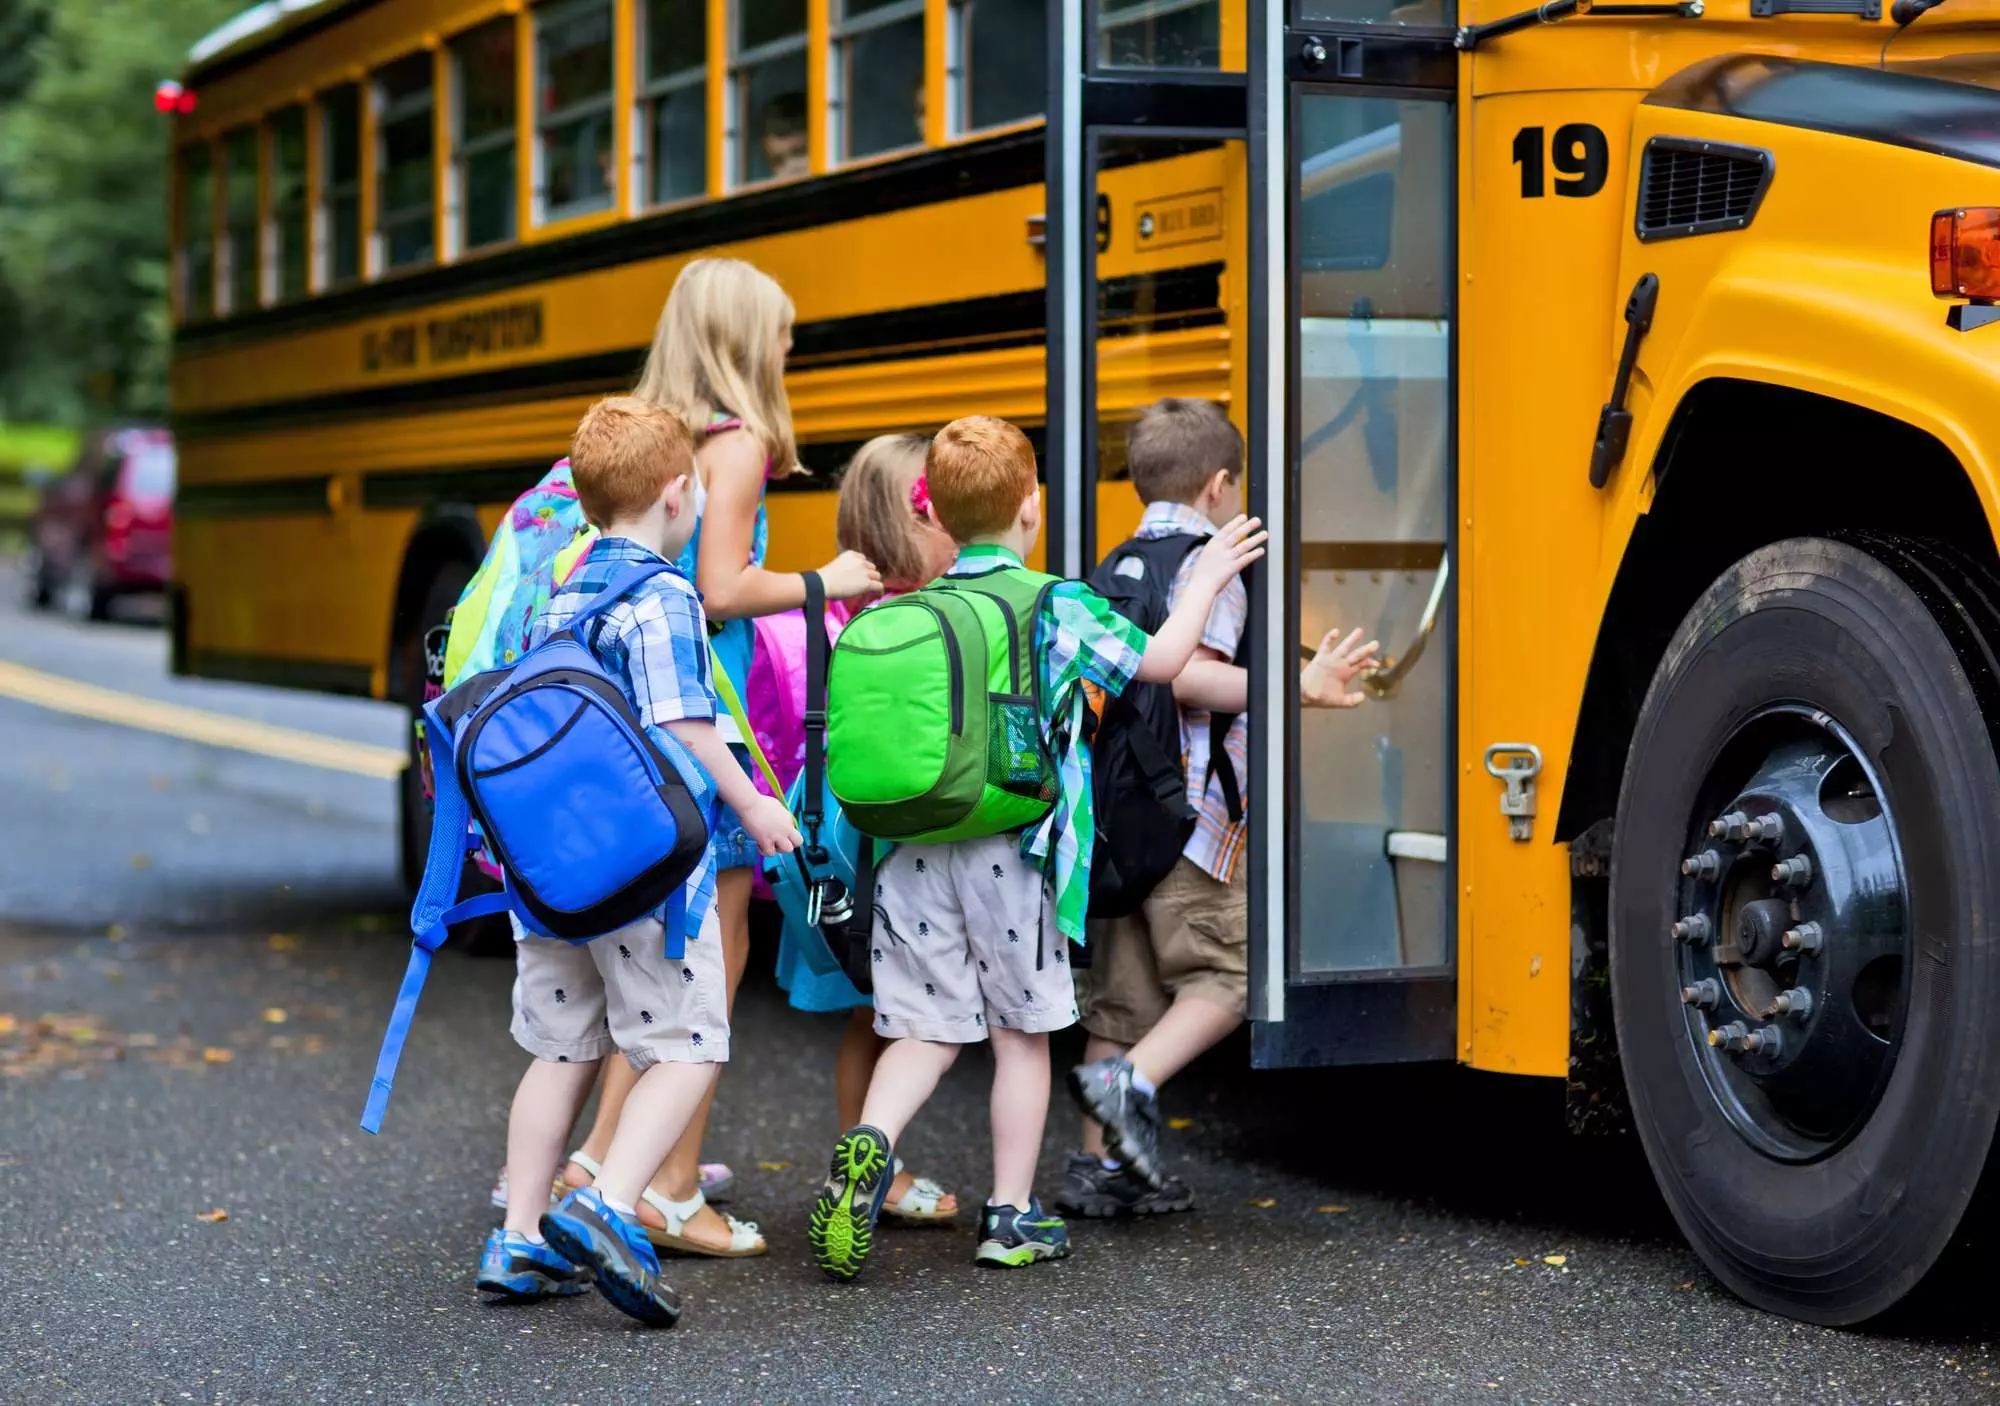 kids getting on the school bus as part of their morning routine for school